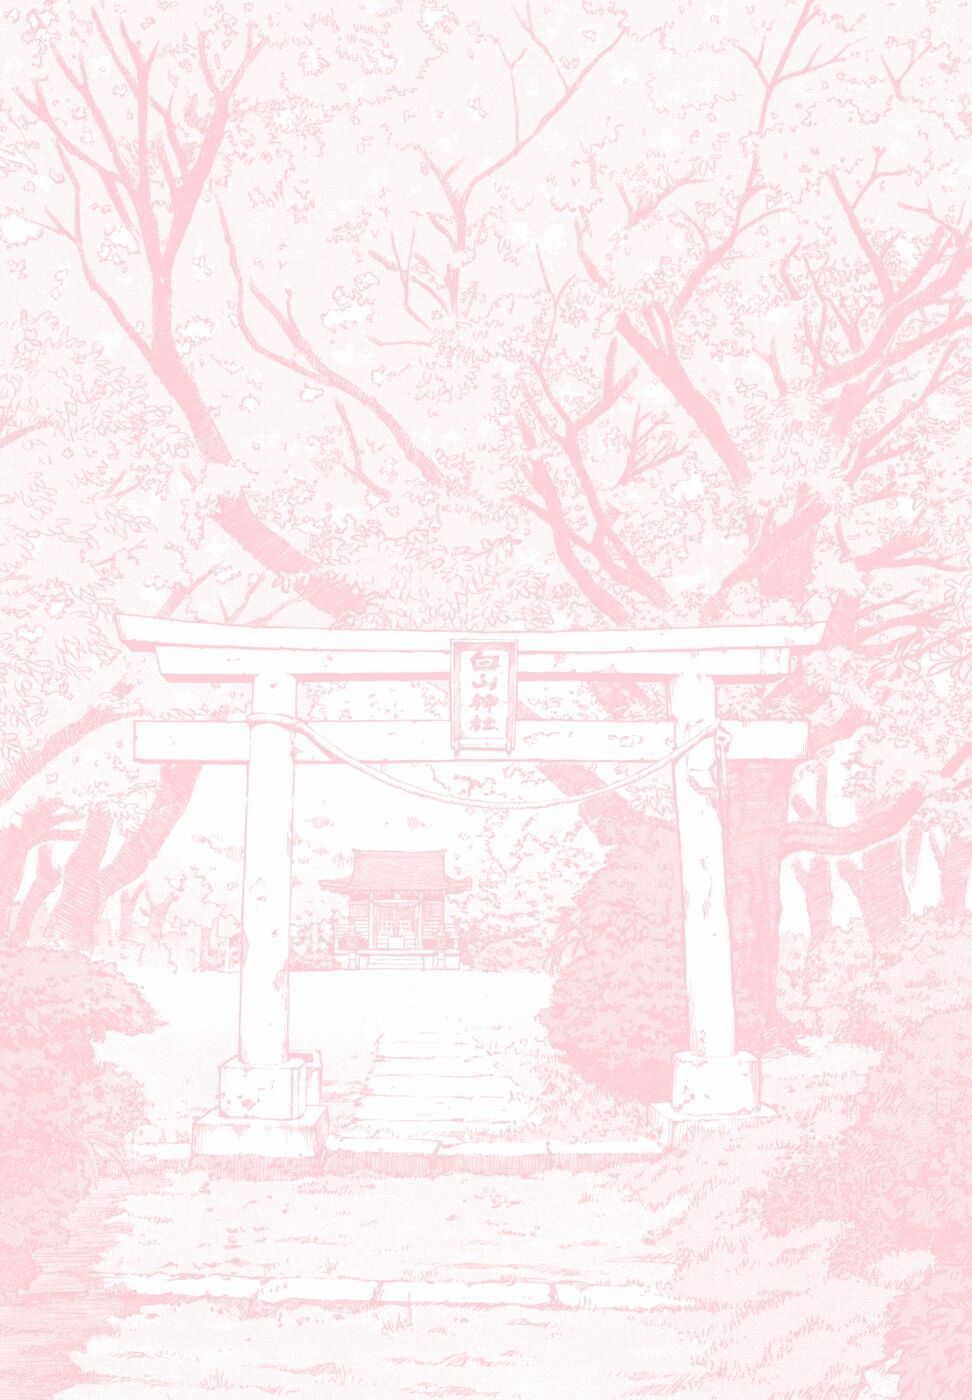 Download Pastel Japanese Aesthetic Pink Pagoda Wallpaper | Wallpapers.com  in 2023 | Japanese aesthetic, Art aesthetic wallpaper, Cool backgrounds